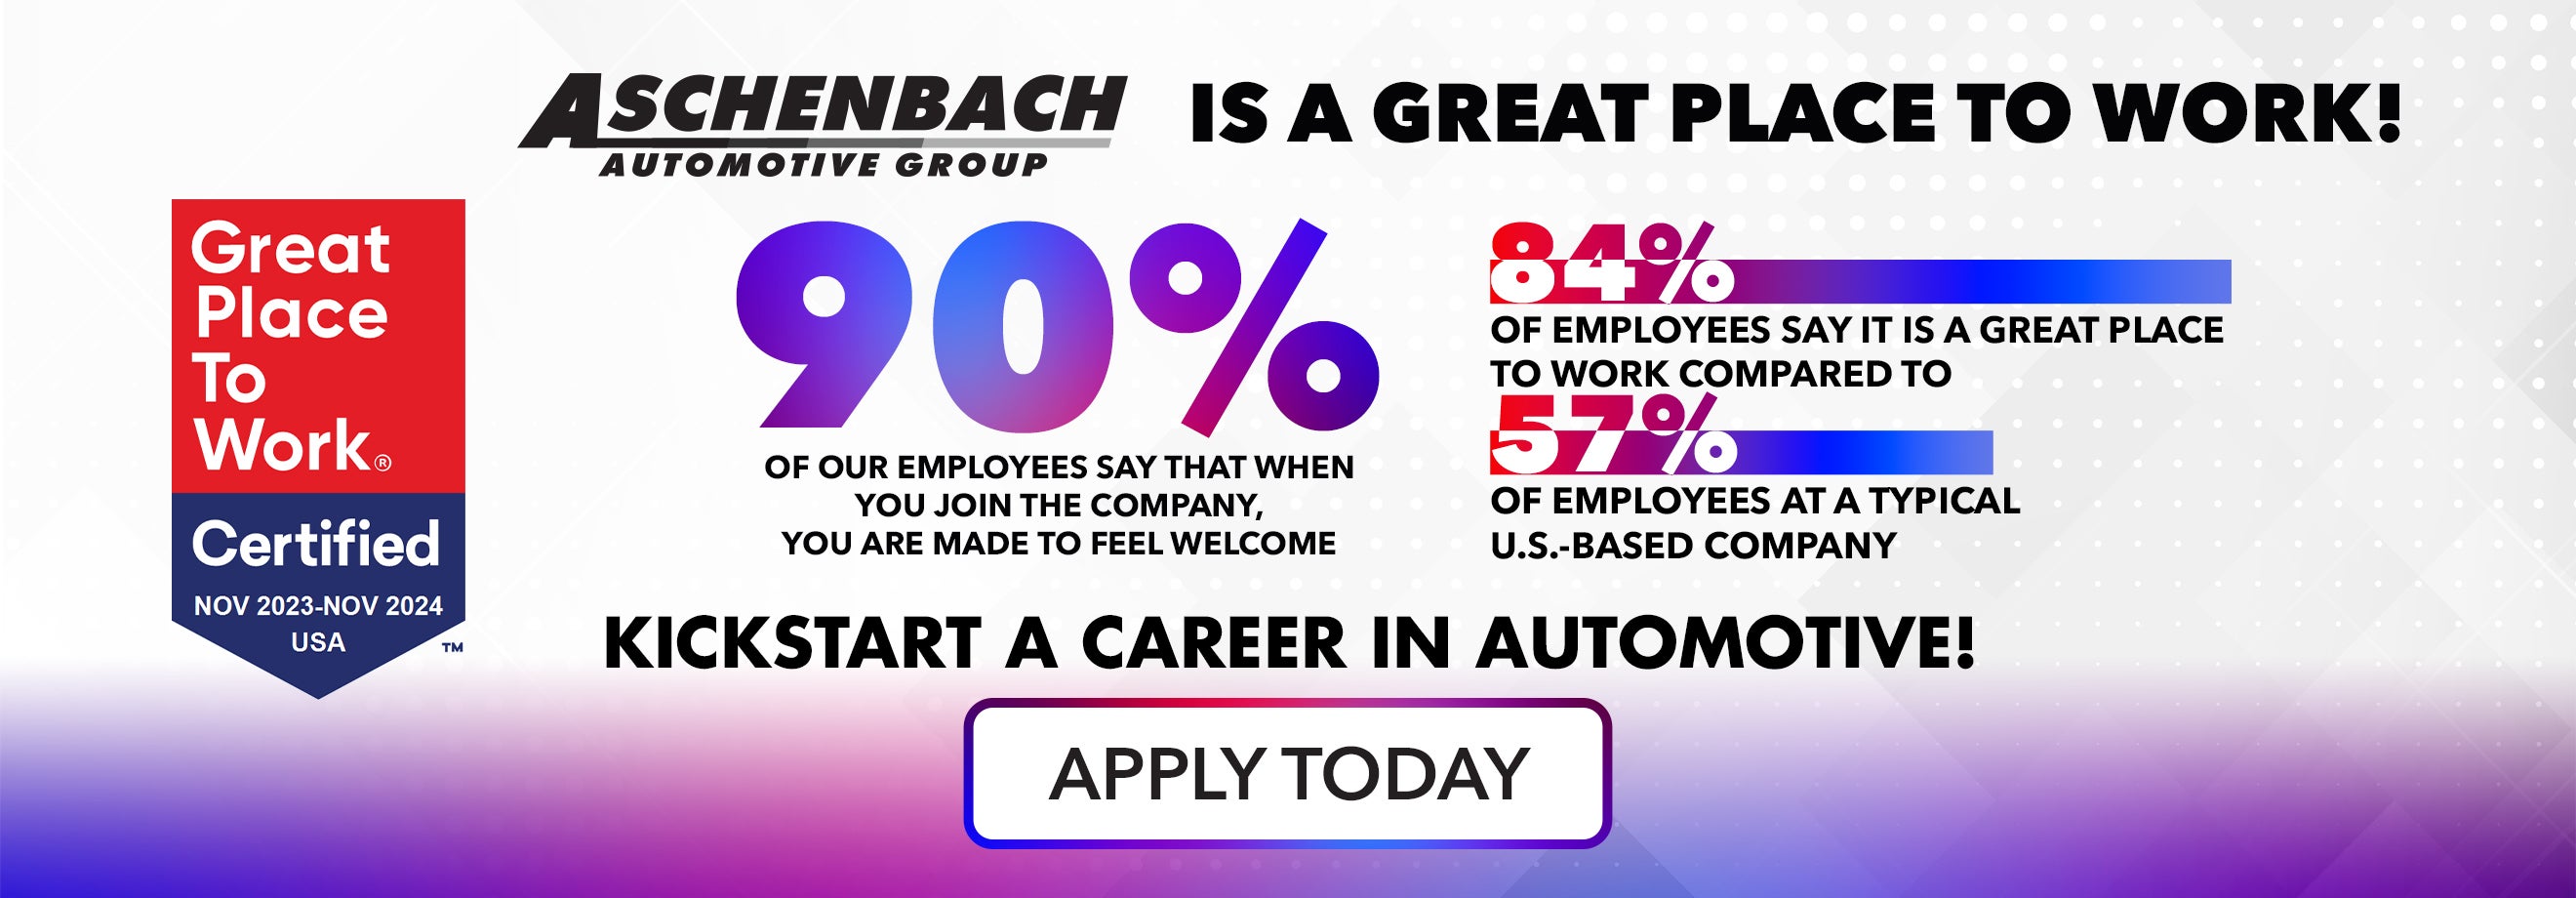 Great Place To Work, Apply Today!